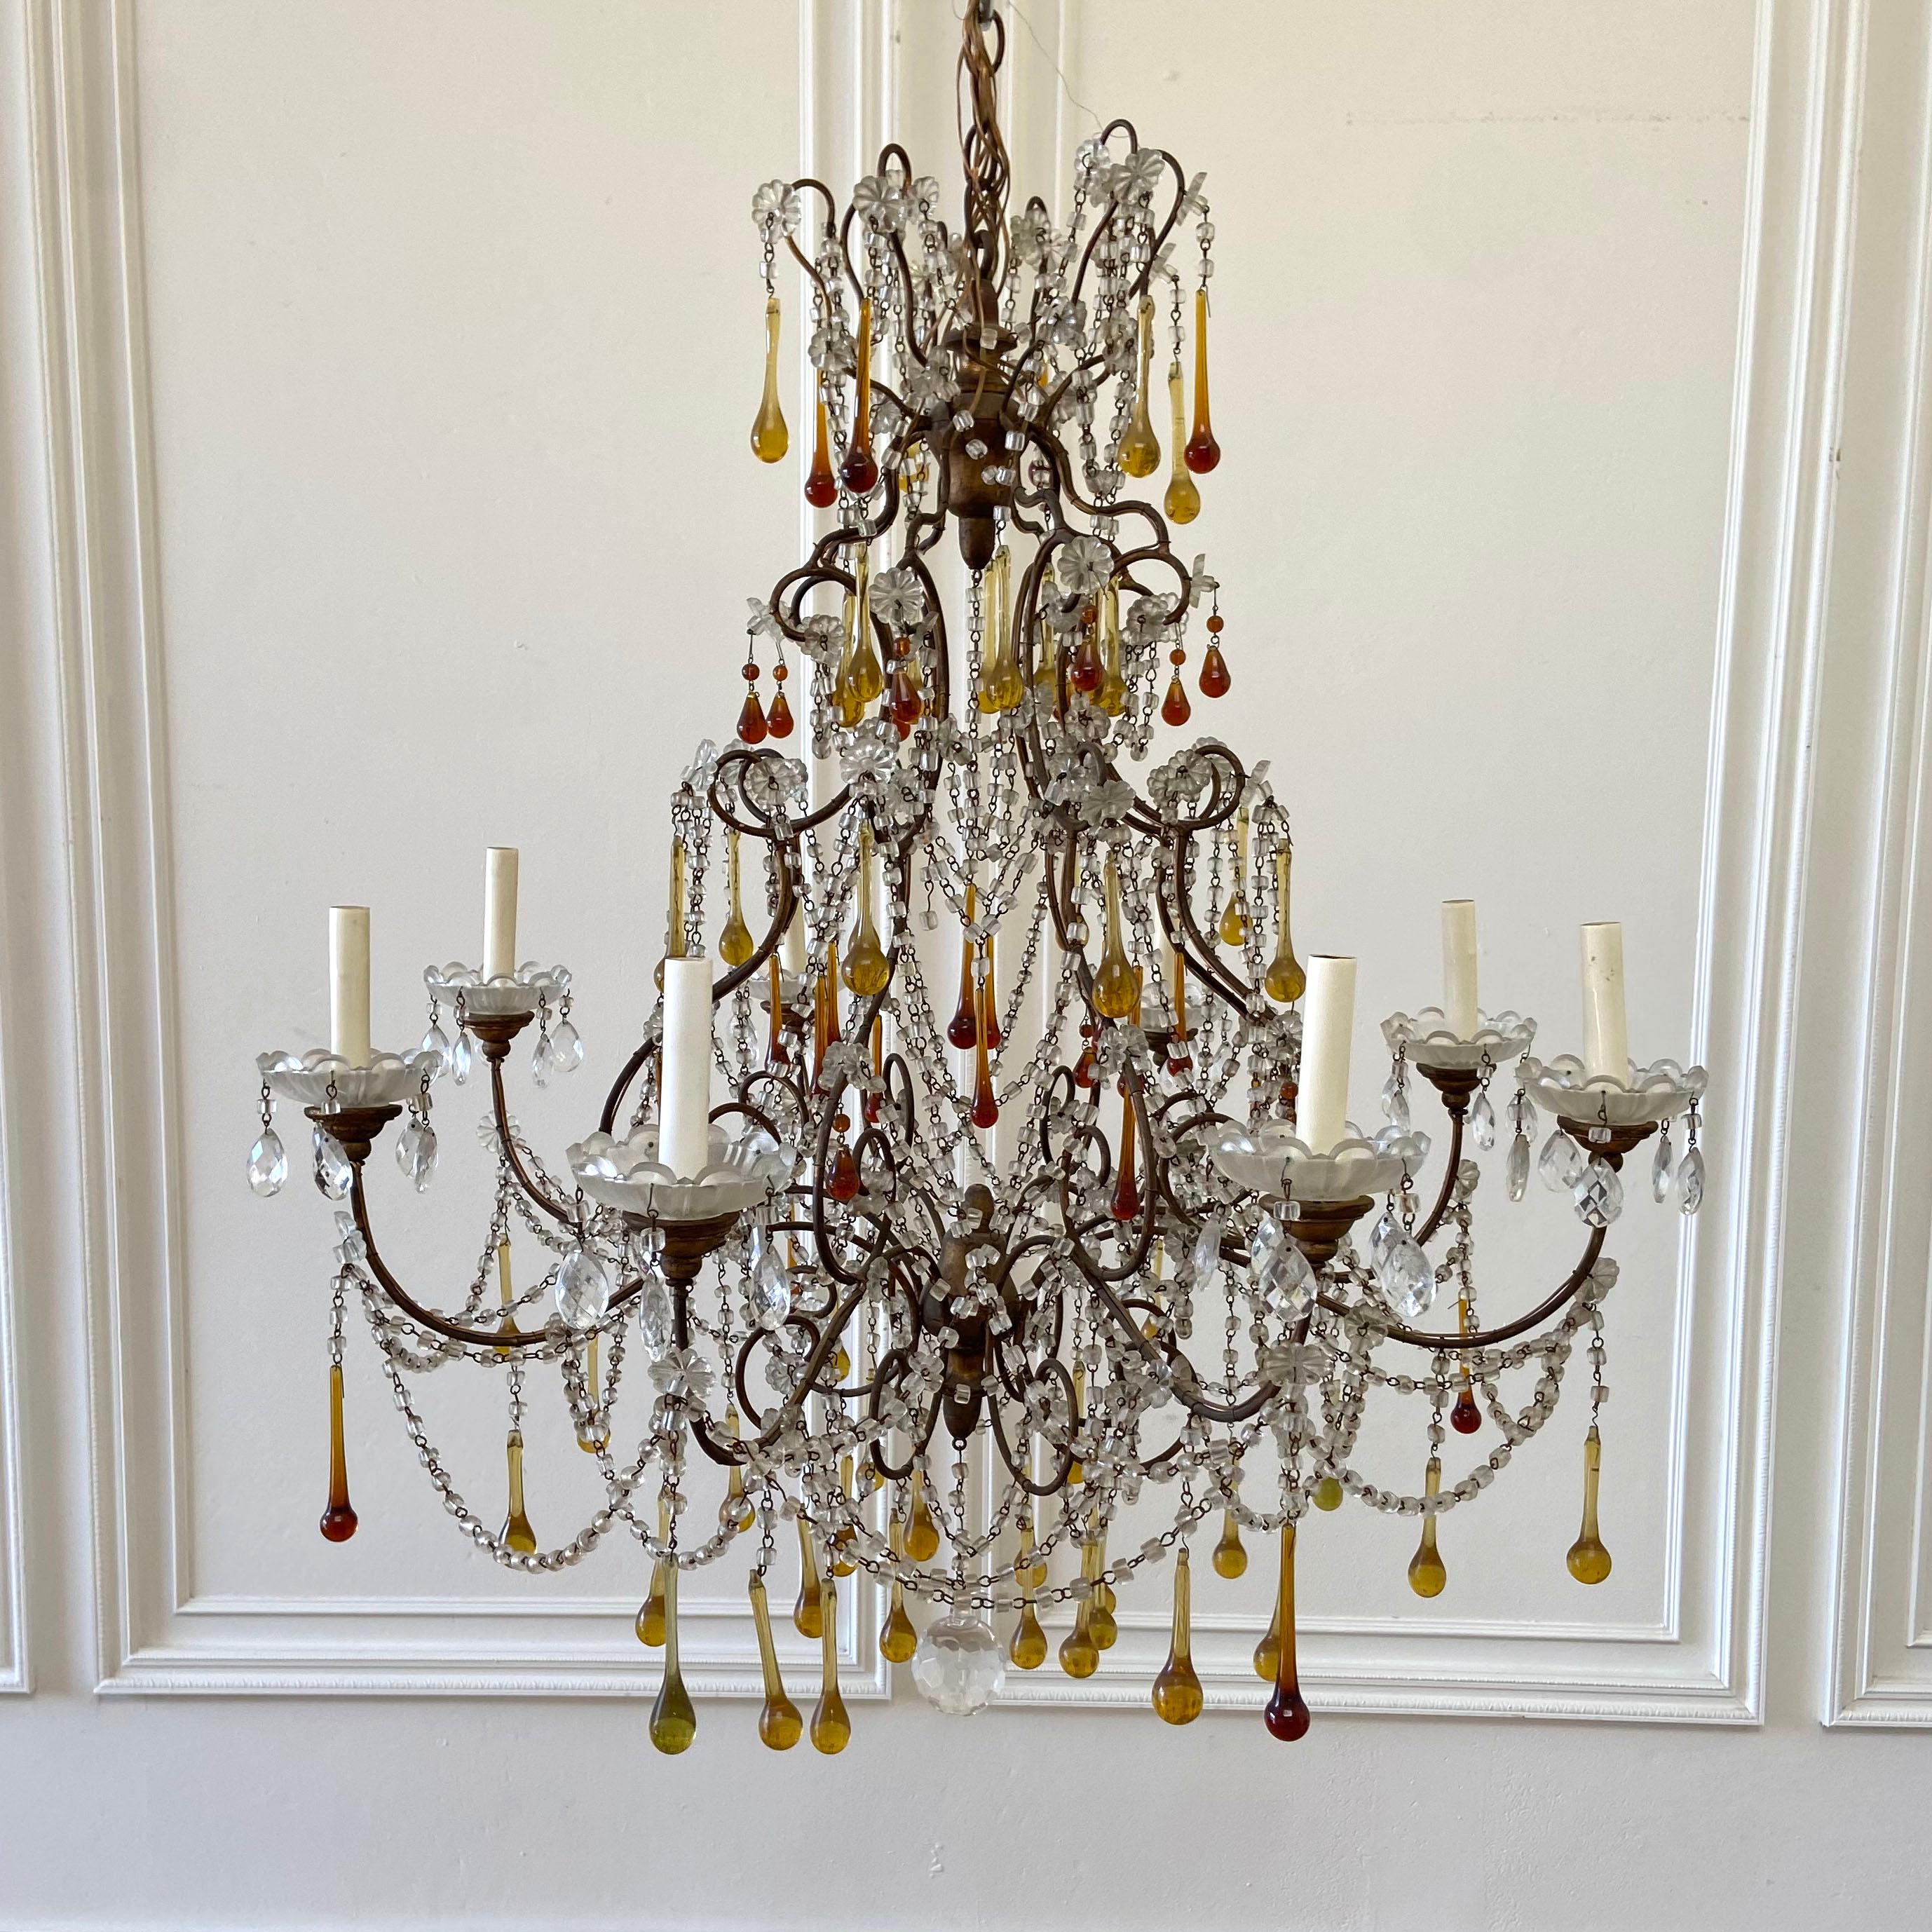 Vintage macaroni beaded chandelier with amber crystals
Dark iron frame chandelier has a deep bronze color, with clear, and clouded macaroni
style beads. Glass bobéches cups, with deep amber drop crystals. They could be removed if you did not want